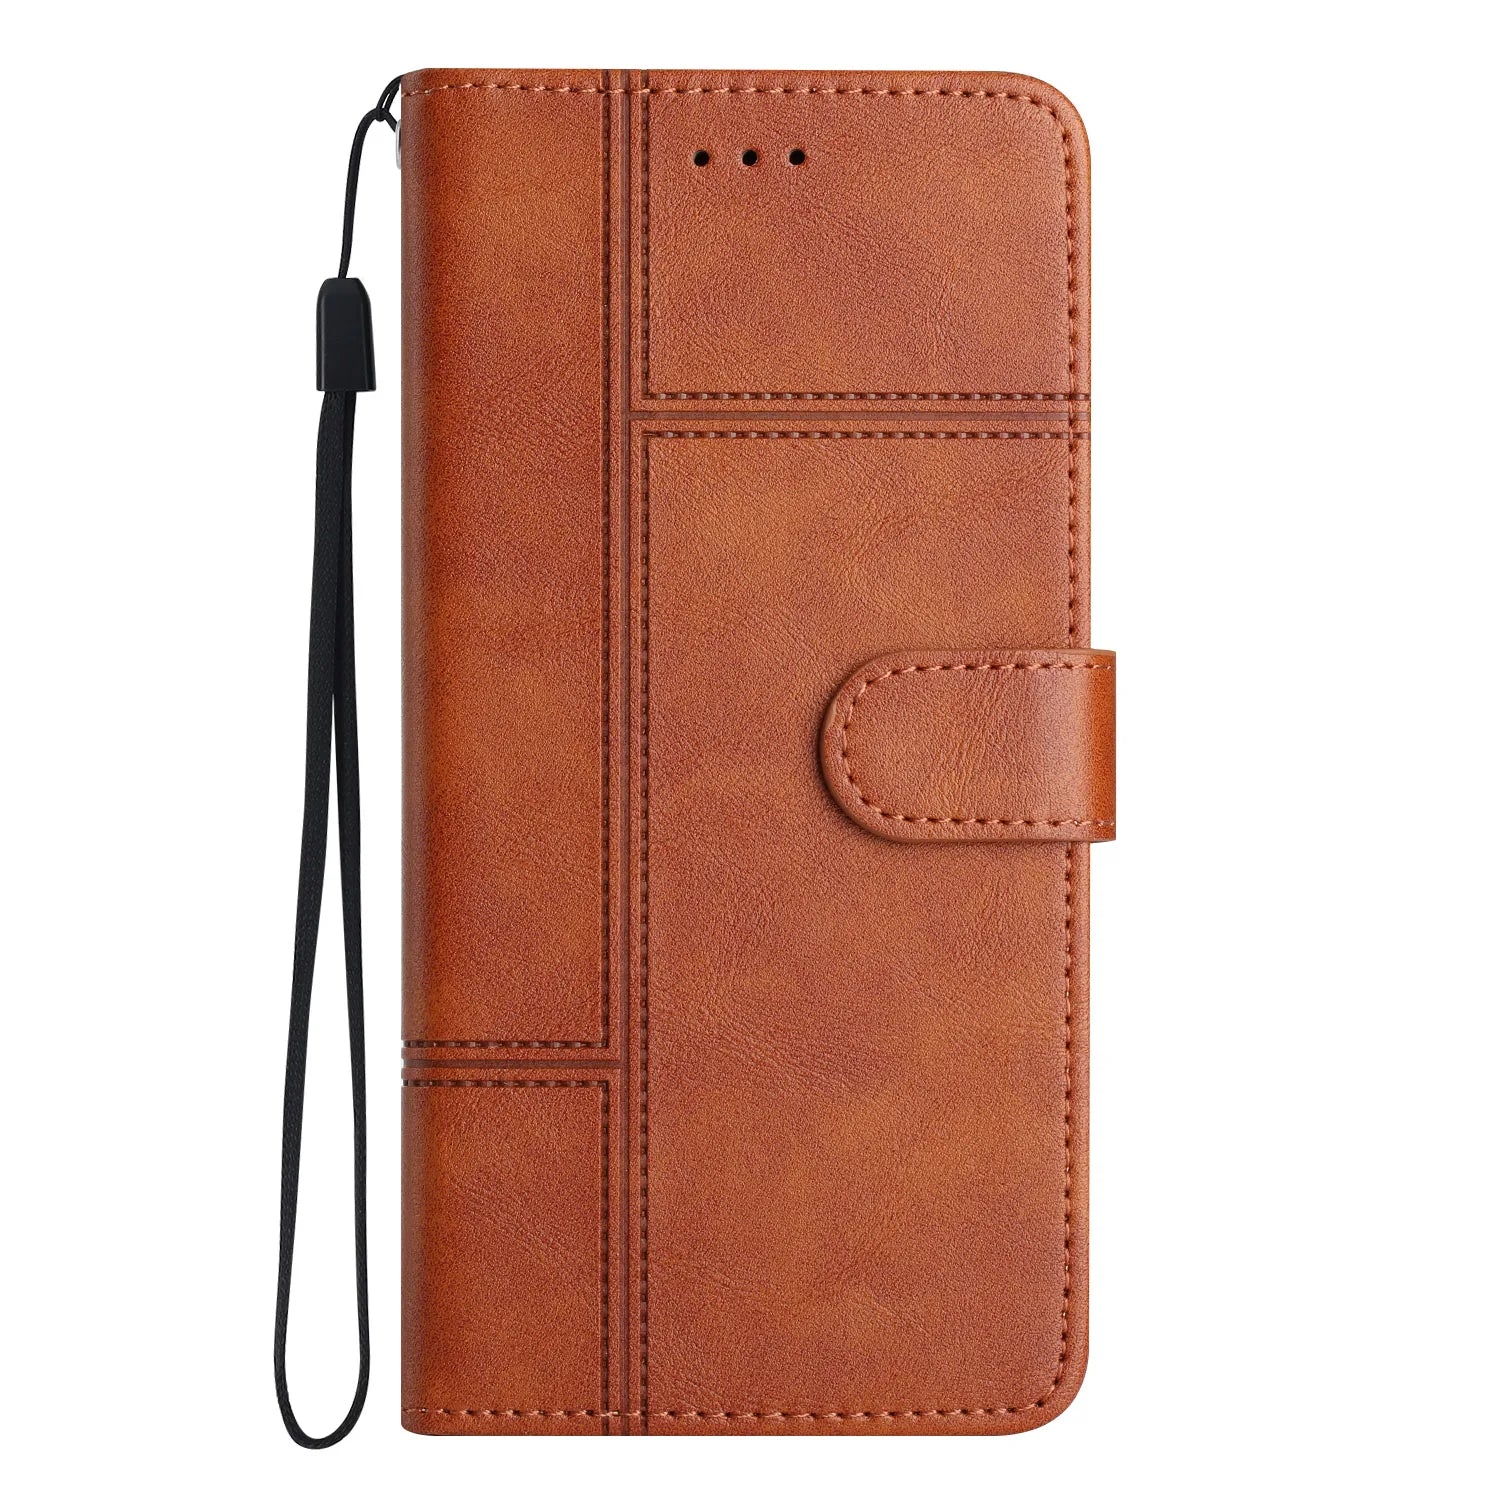 Slim Fit Wallet Leather iPhone Case With Card Slots - DealJustDeal